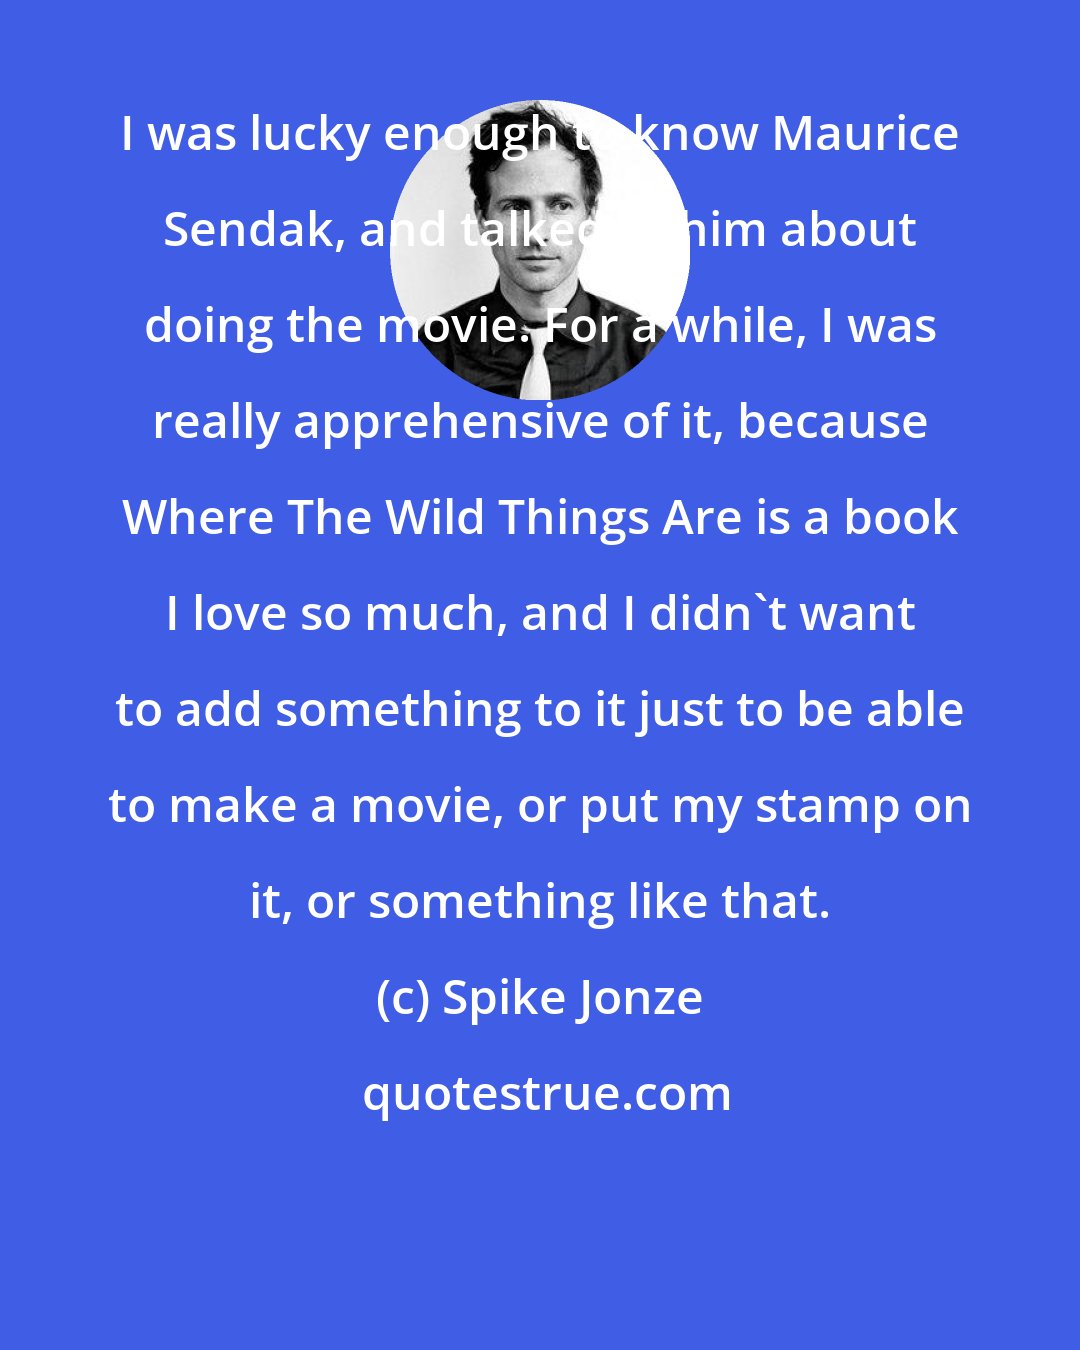 Spike Jonze: I was lucky enough to know Maurice Sendak, and talked to him about doing the movie. For a while, I was really apprehensive of it, because Where The Wild Things Are is a book I love so much, and I didn't want to add something to it just to be able to make a movie, or put my stamp on it, or something like that.